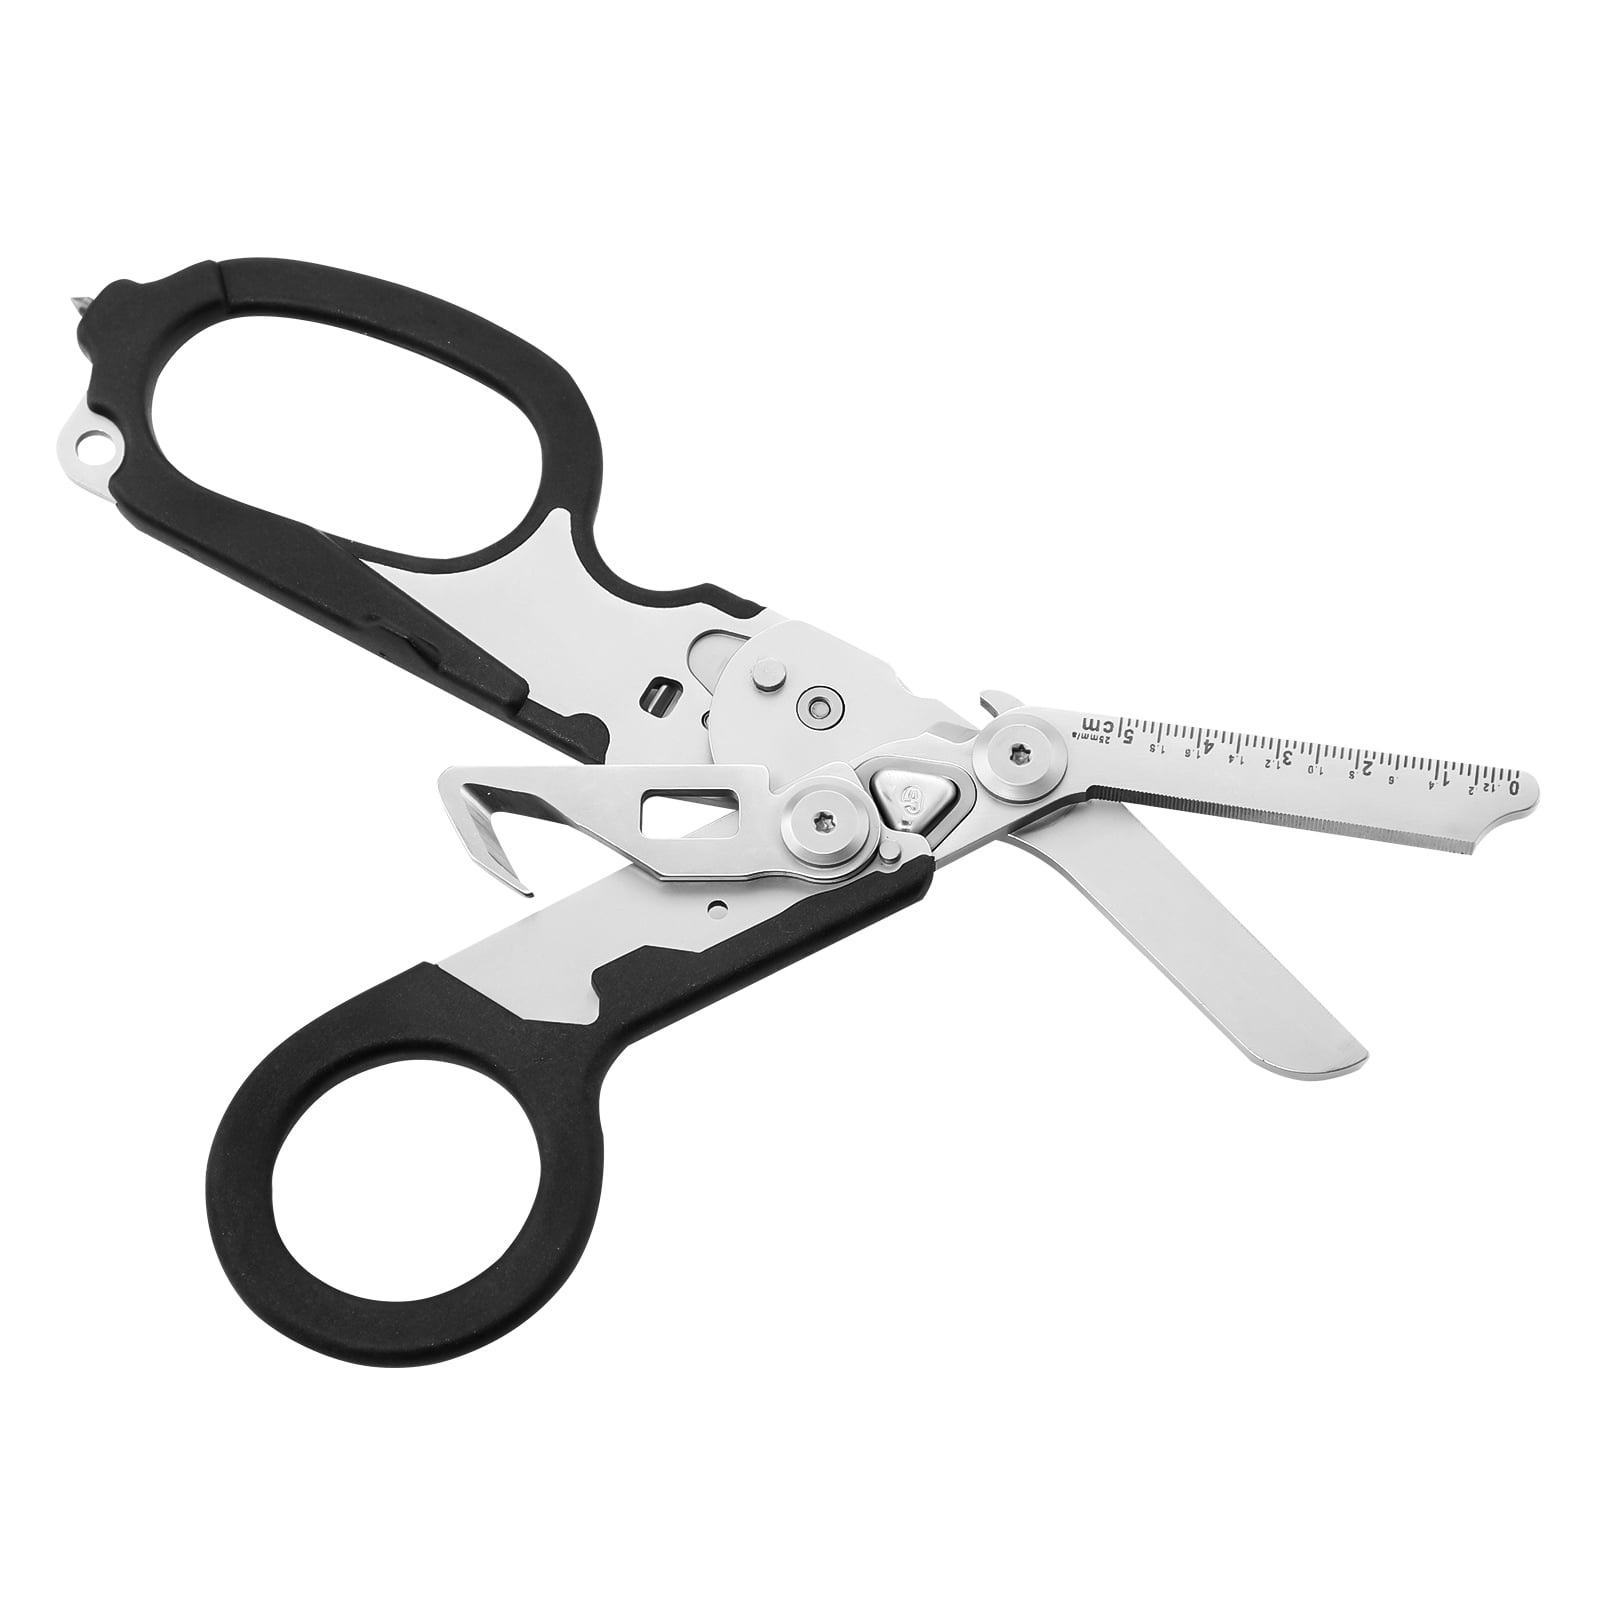 Multi-Tool Shears Tactics Scissors Folding Pliers Practical Cable Wire Cutter